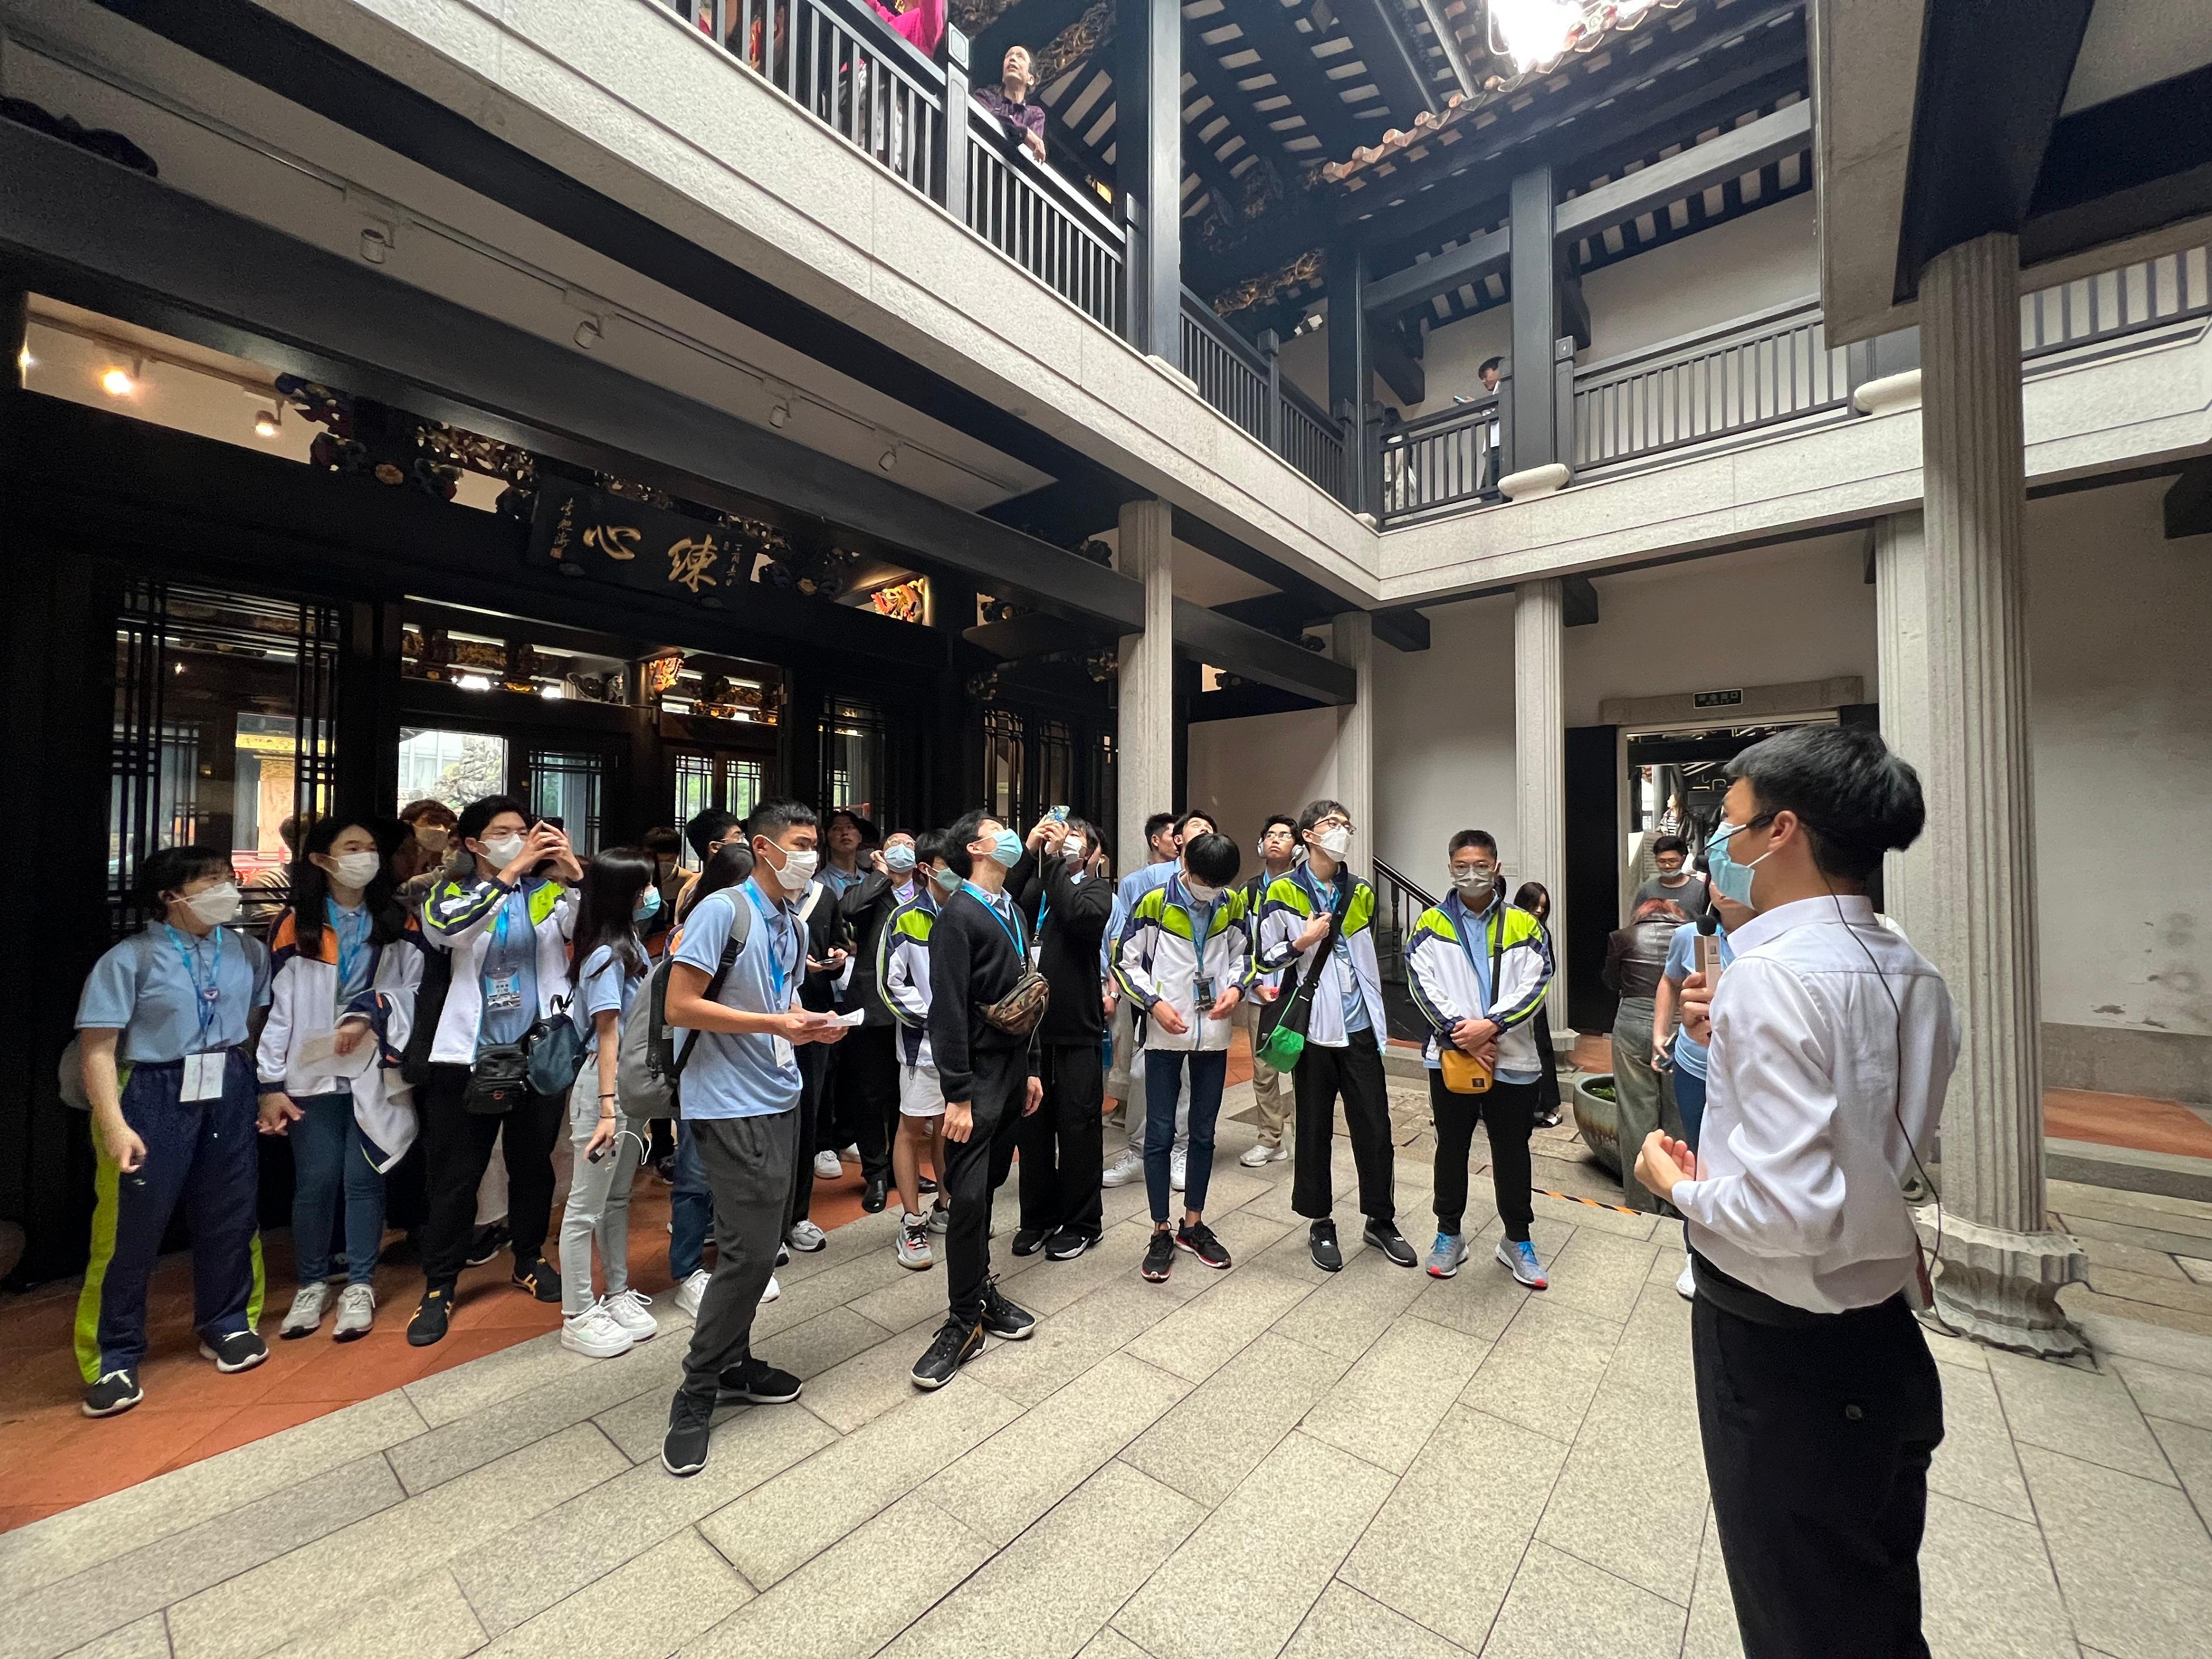 The delegation of the first Mainland study tour for students of the senior secondary subject of Citizenship and Social Development visited Guangzhou today (April 3). Photo shows members of the delegation visiting the Cantonese Opera Art Museum at Yongqing Fang.